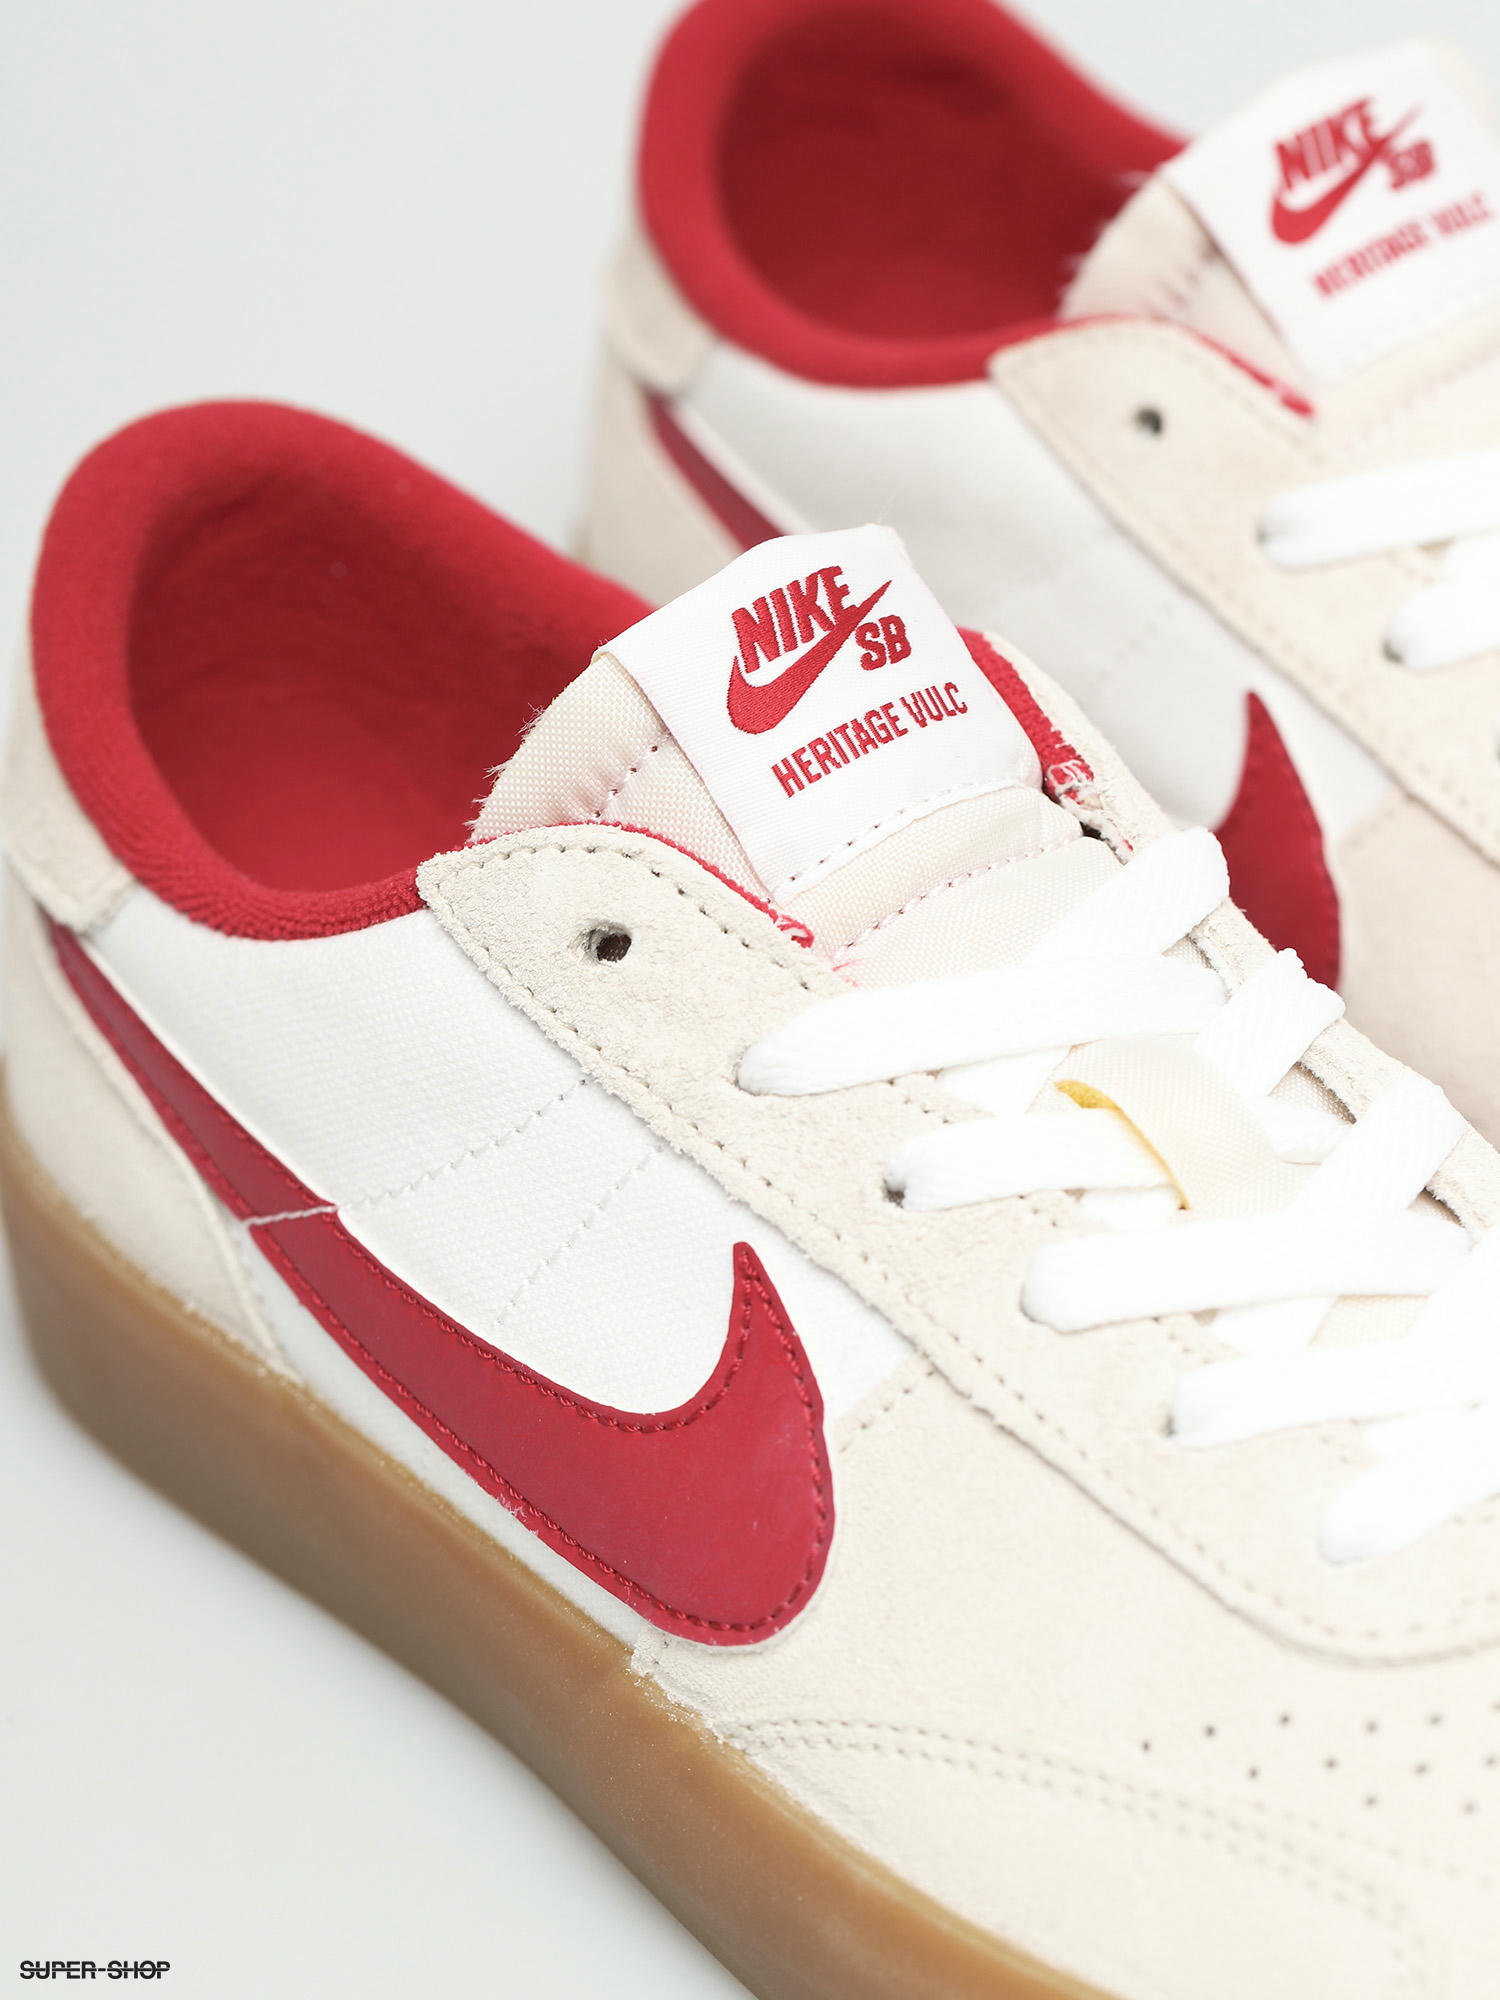 nike sb red and white